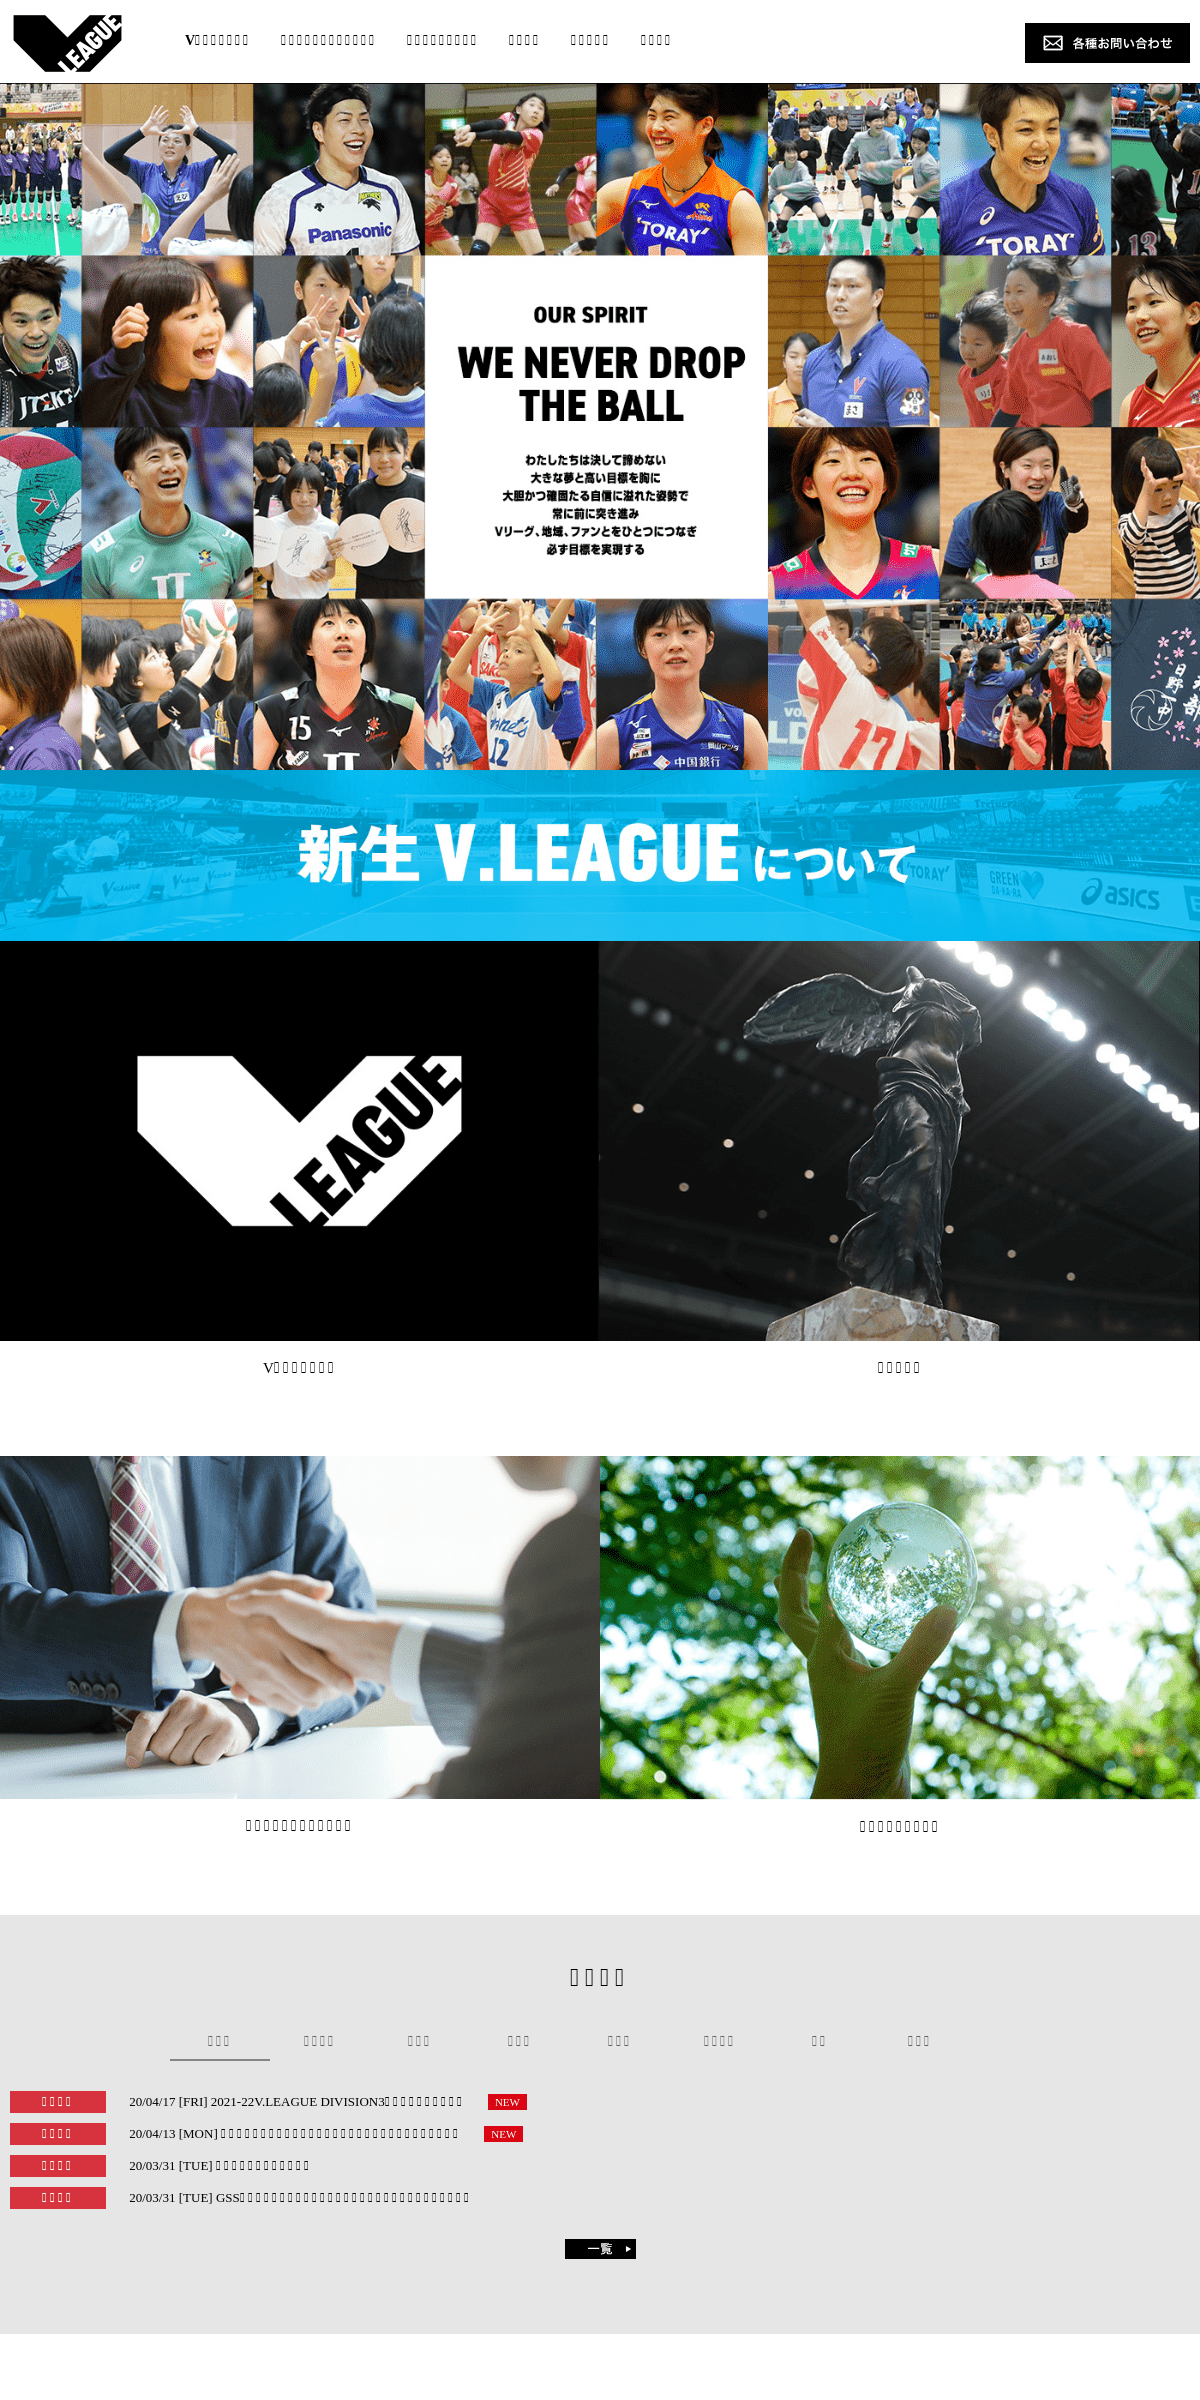 A complete backup of vleague.or.jp